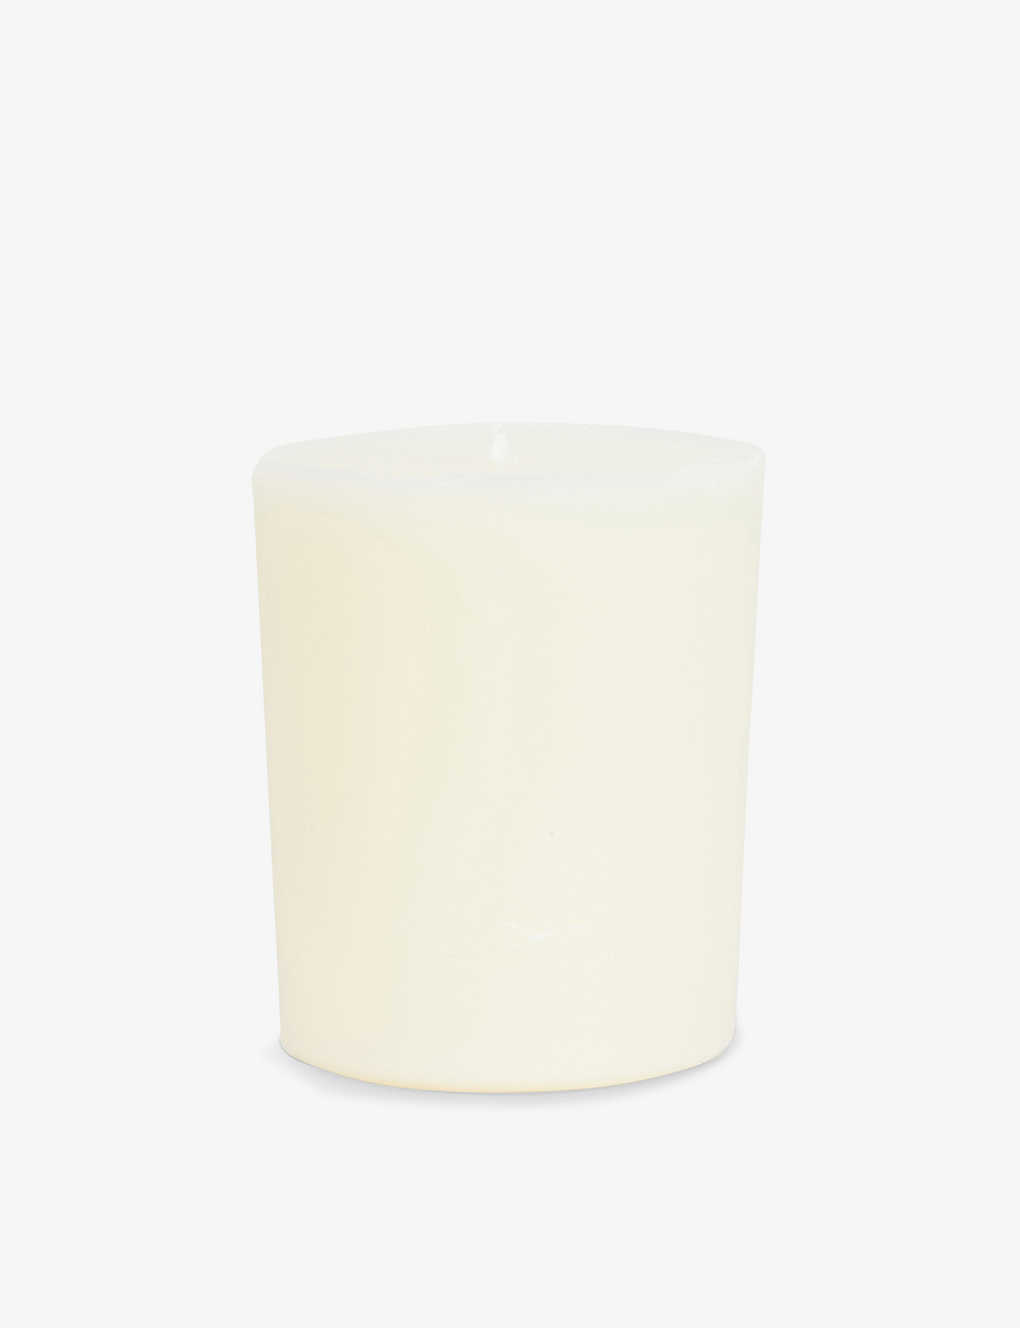 D'orsay Dorsay 21:30 Scented Candle Refill 250g